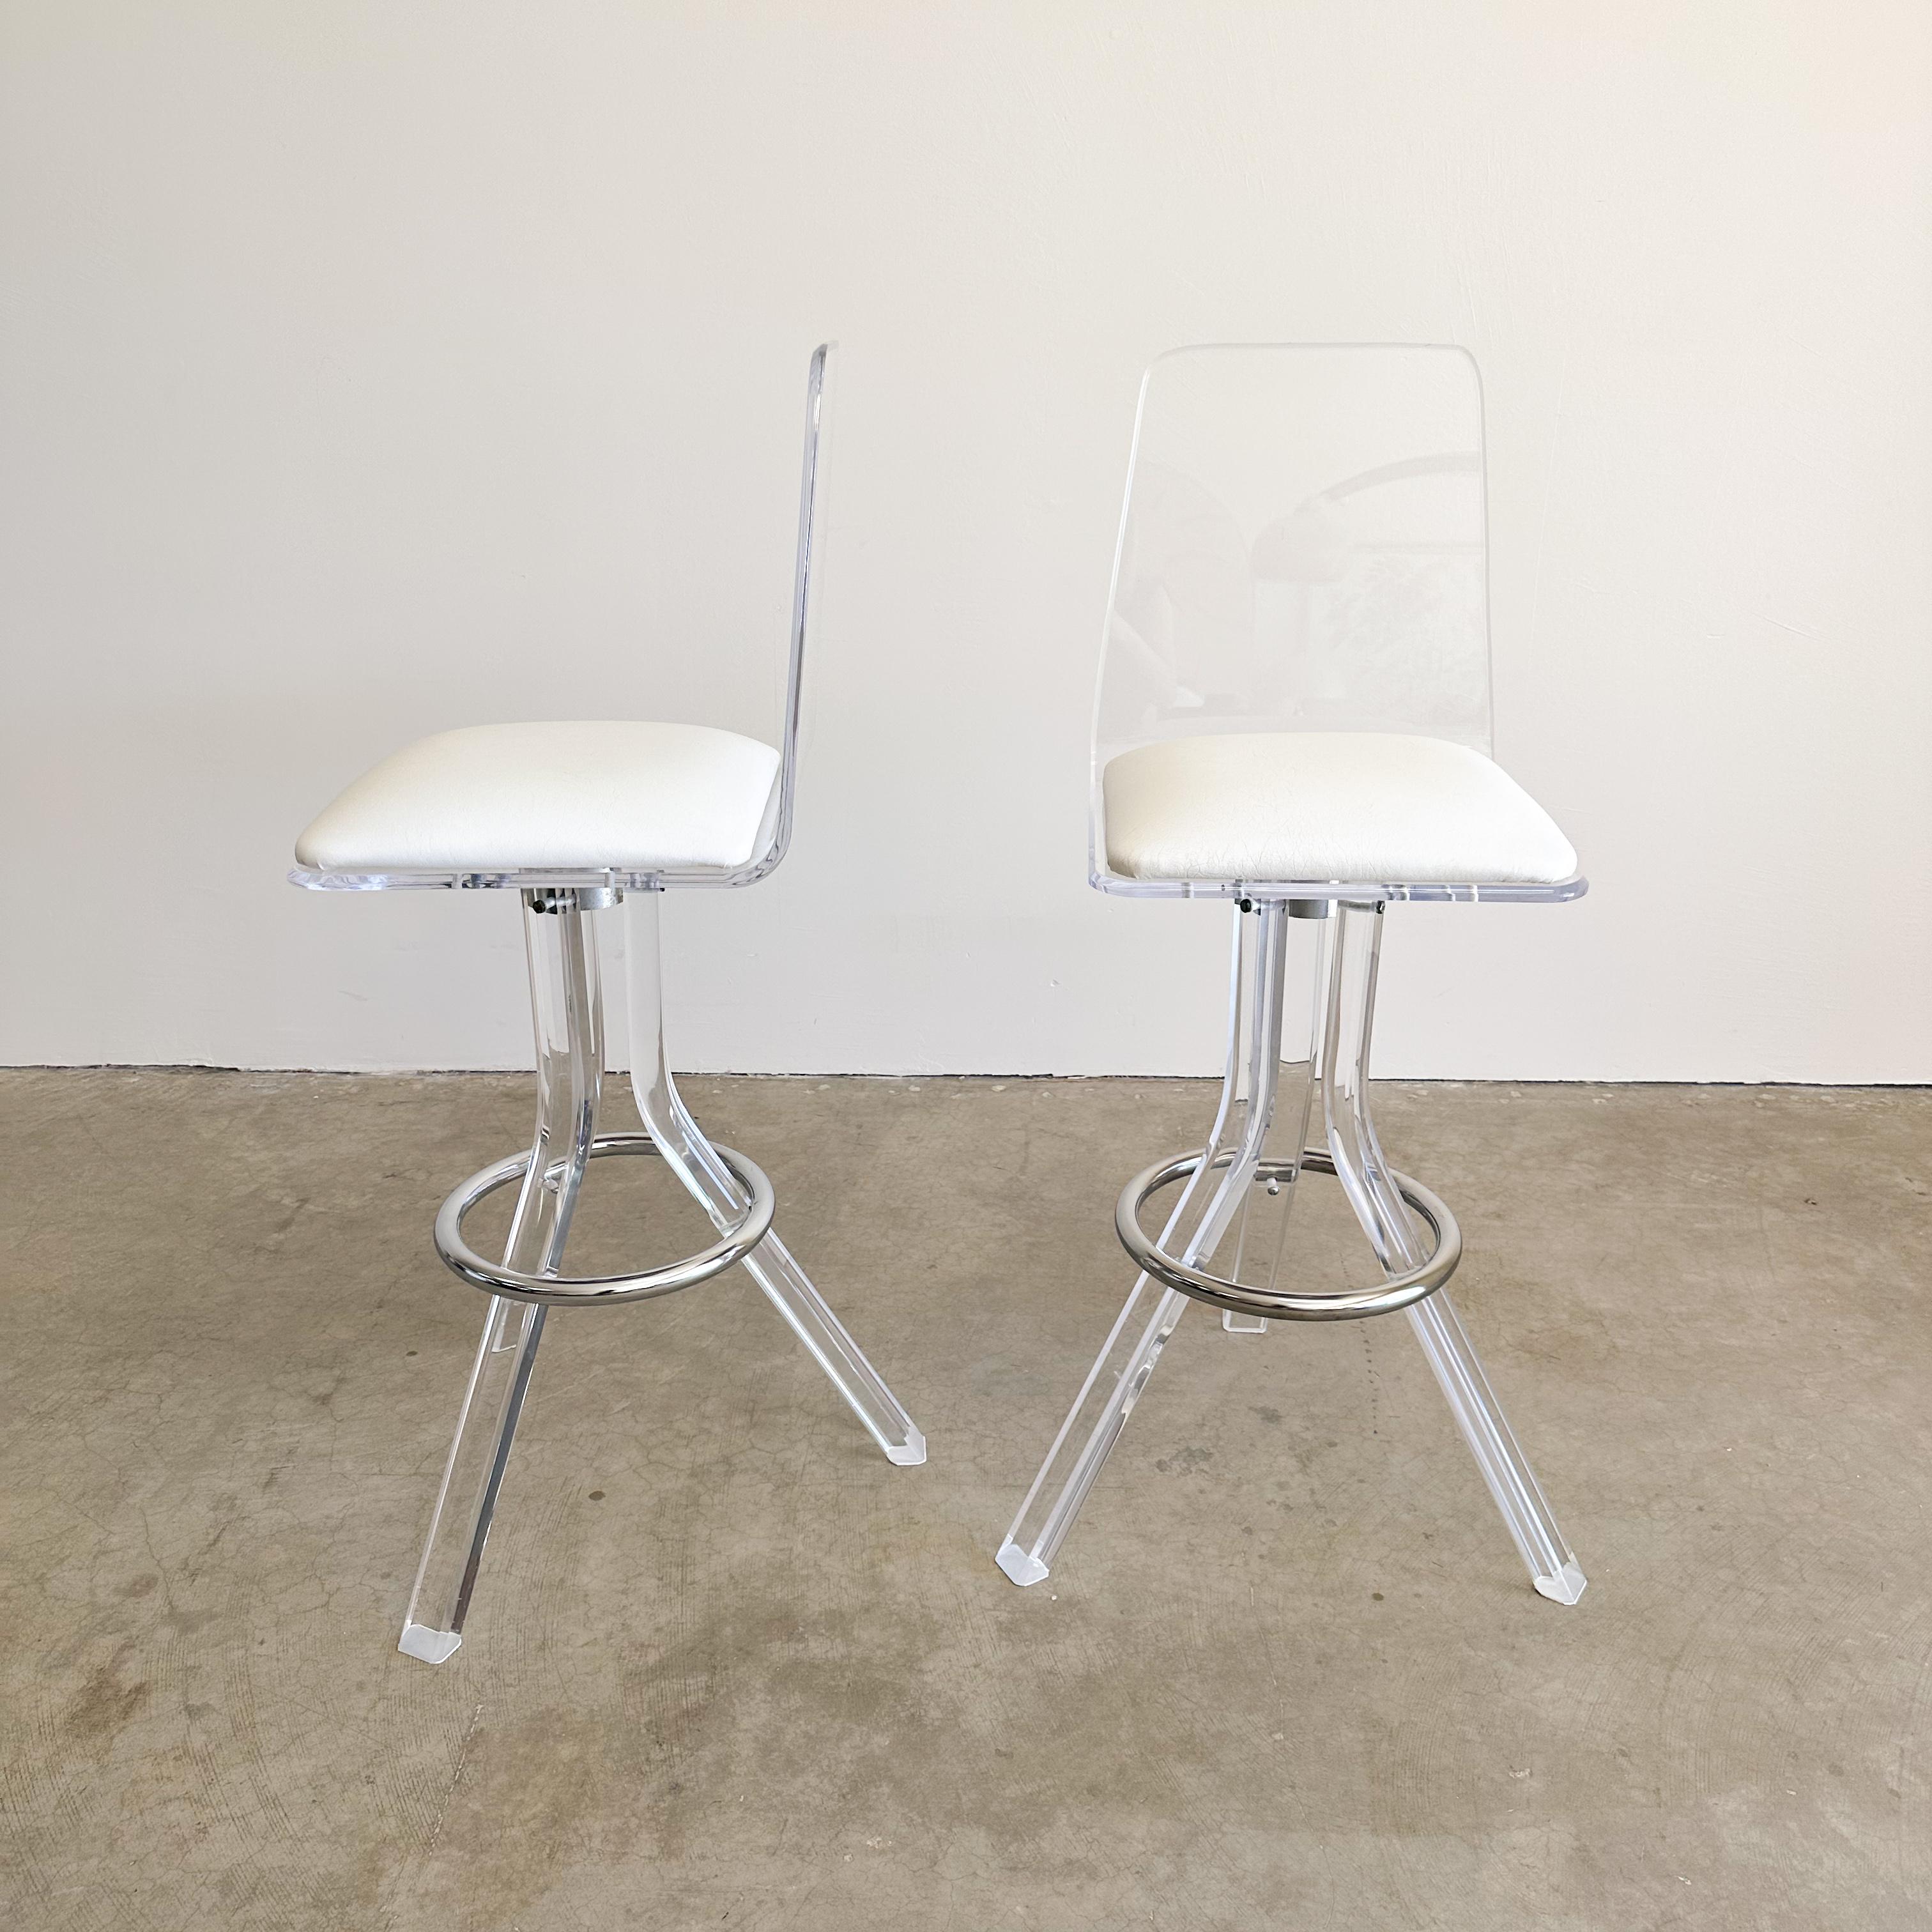 Pair of Vintage Lucite And Chrome Bar Stool. 

The barstools feature lucite construction with swivel functionality, a chrome leg rest, and a seat made of leather or pleather (not sure). 

Color: White 

Measurements: 
Width: 16